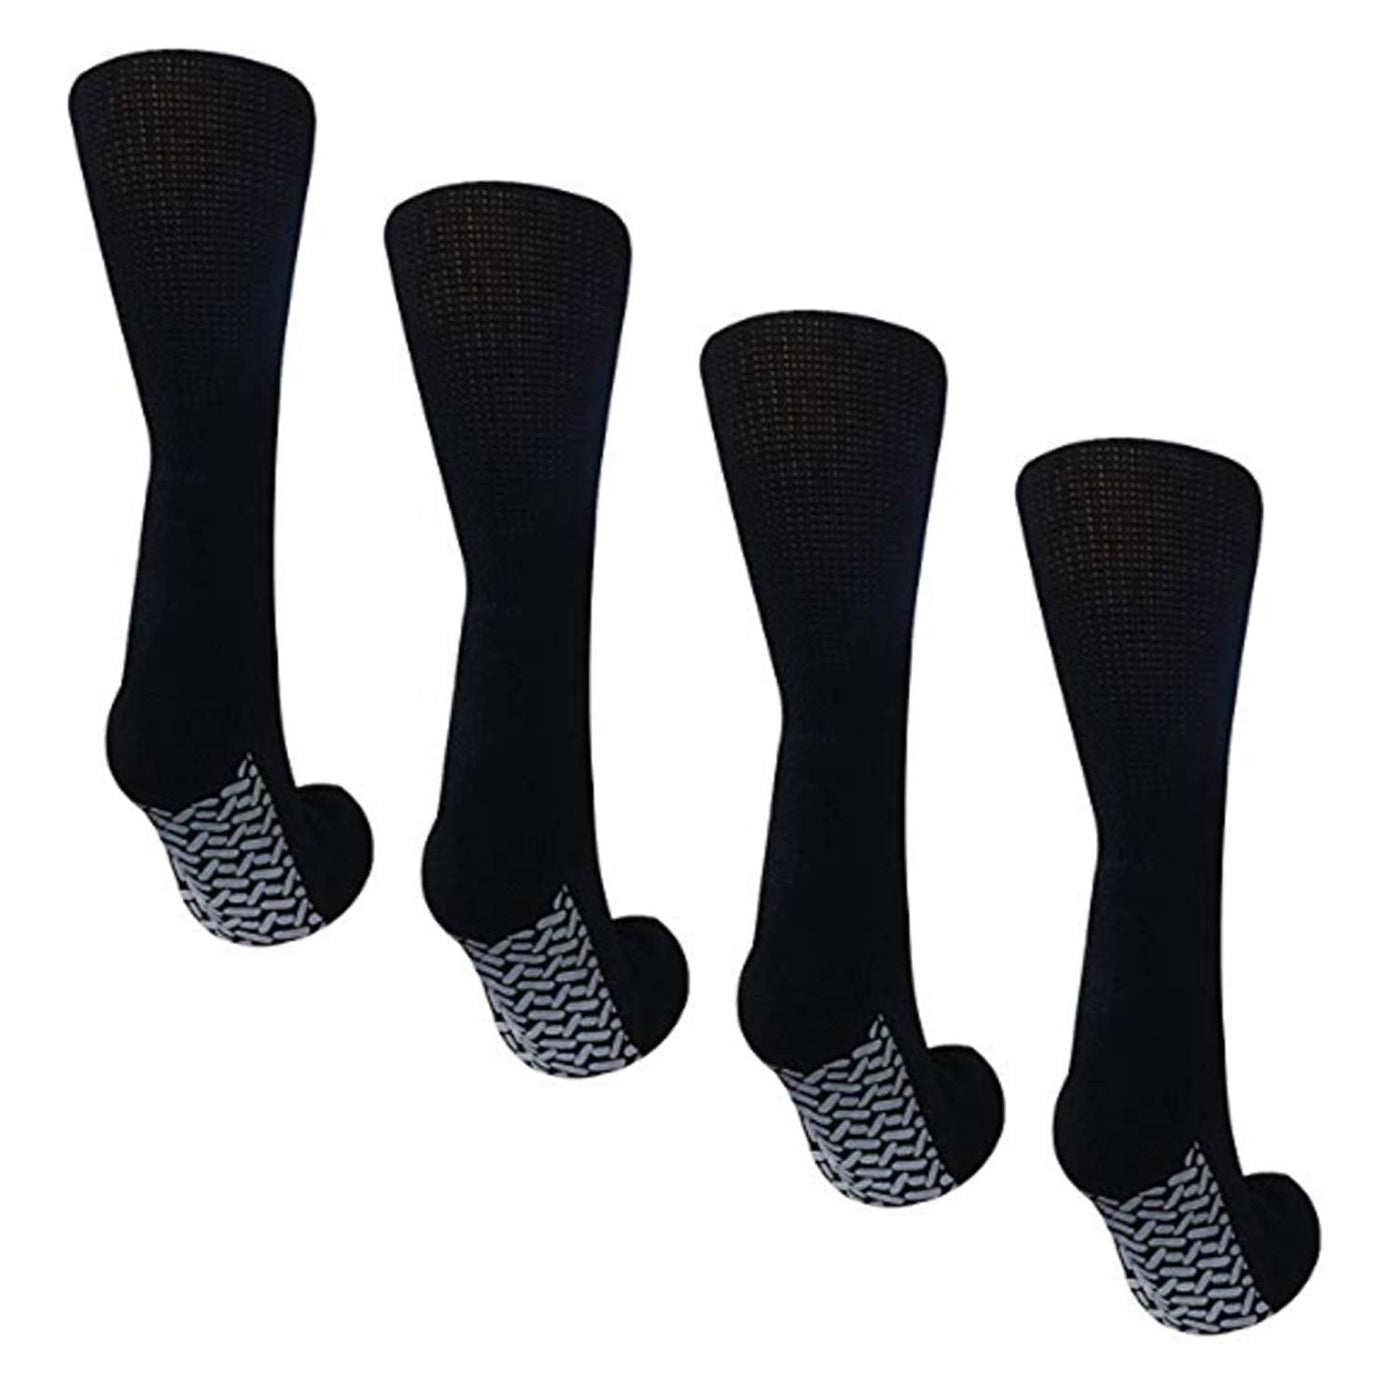 Diabetic Non Skid Hospital Slipper Socks (6-Pack) - Noble's Health Care Products Solutions